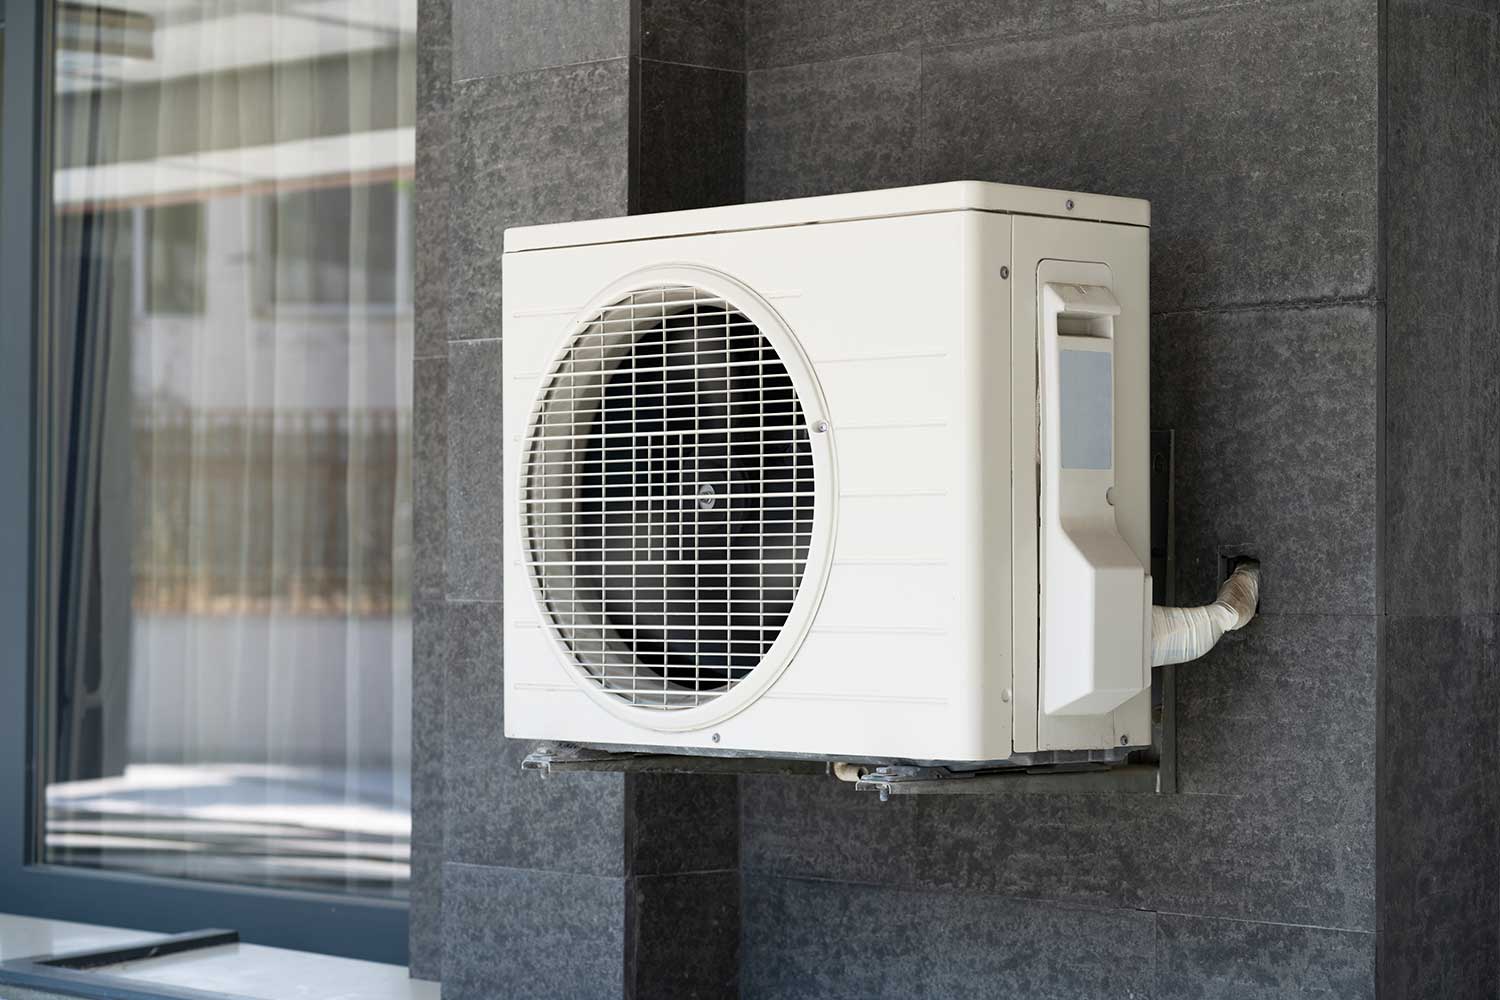 Listing priorities with your Heating & Air Conditioning system at the top